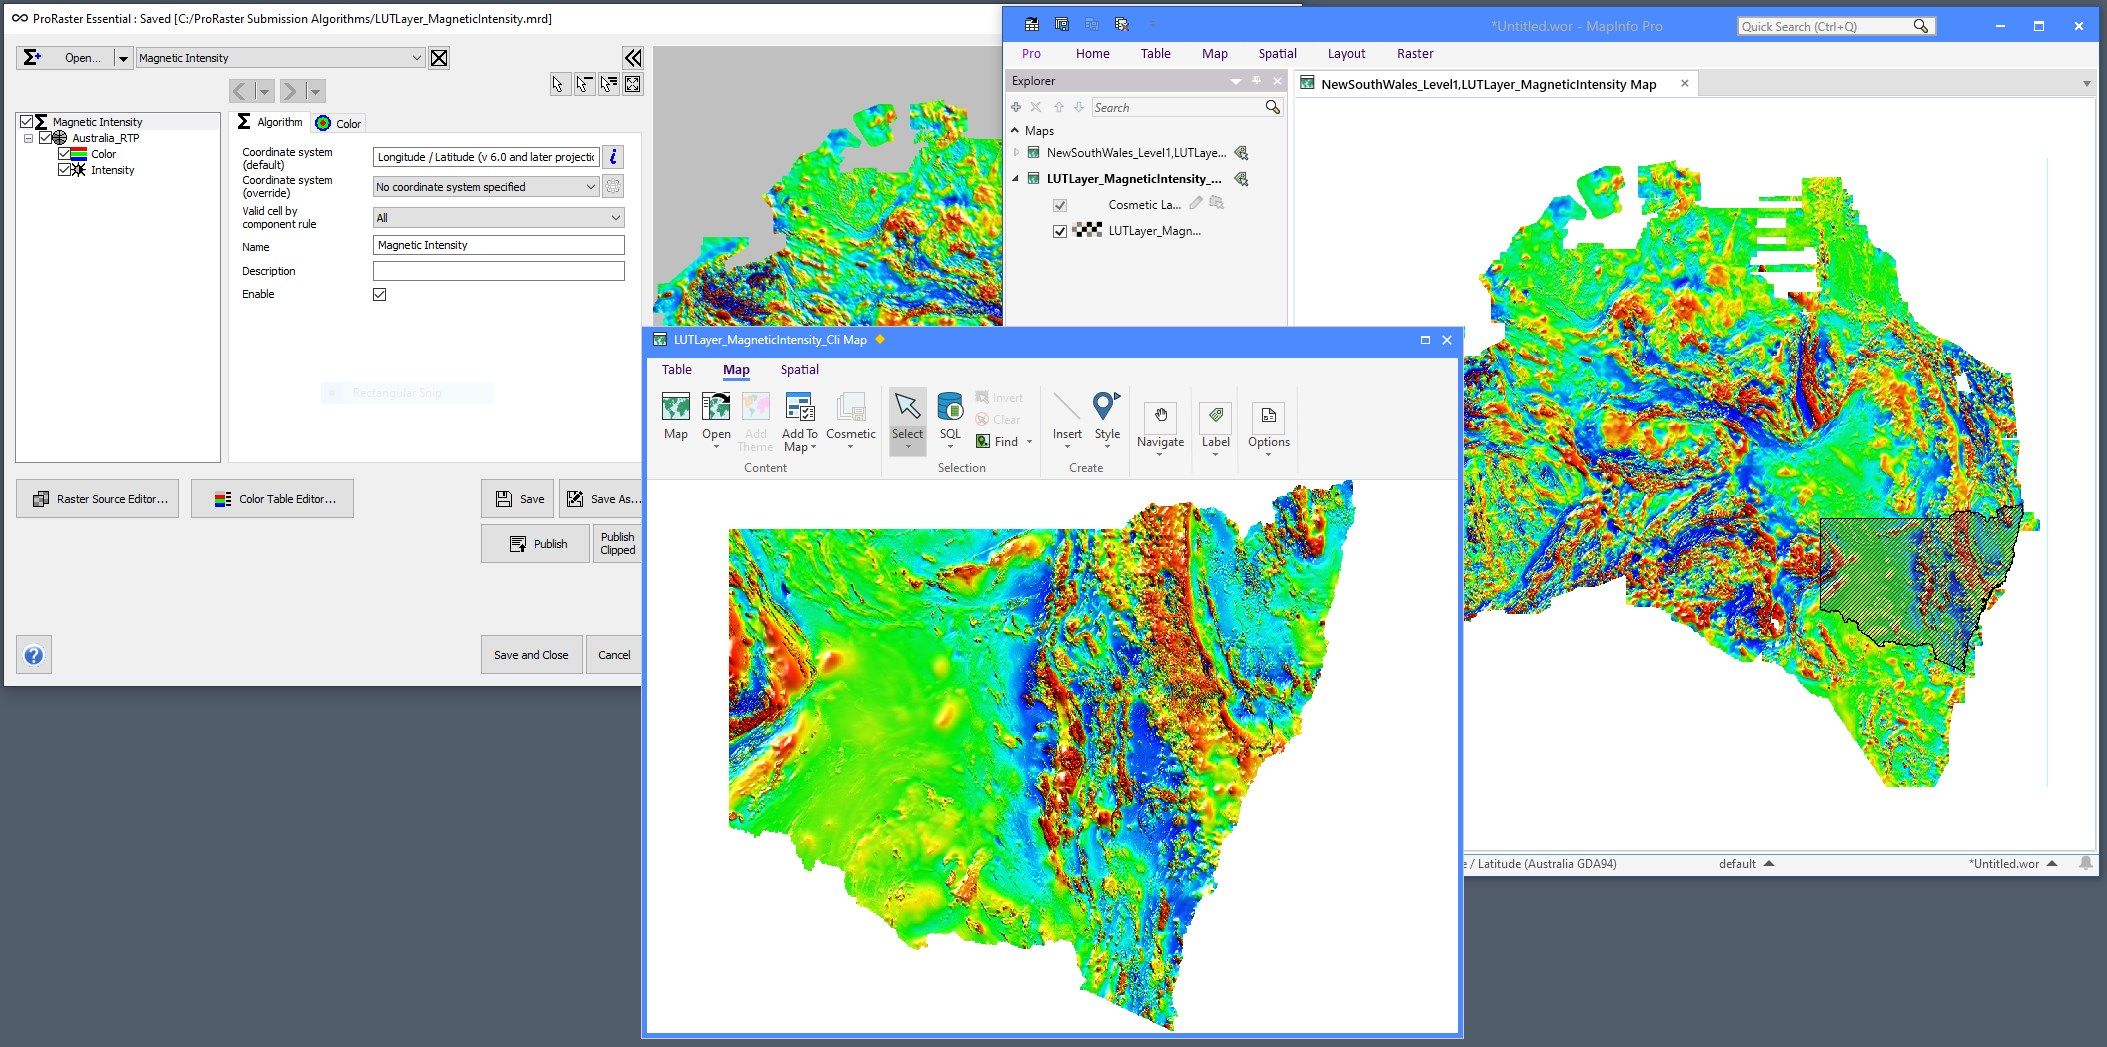 Publish MRD algorithms to MapInfo Pro 2021 clipped to complex polygon sets